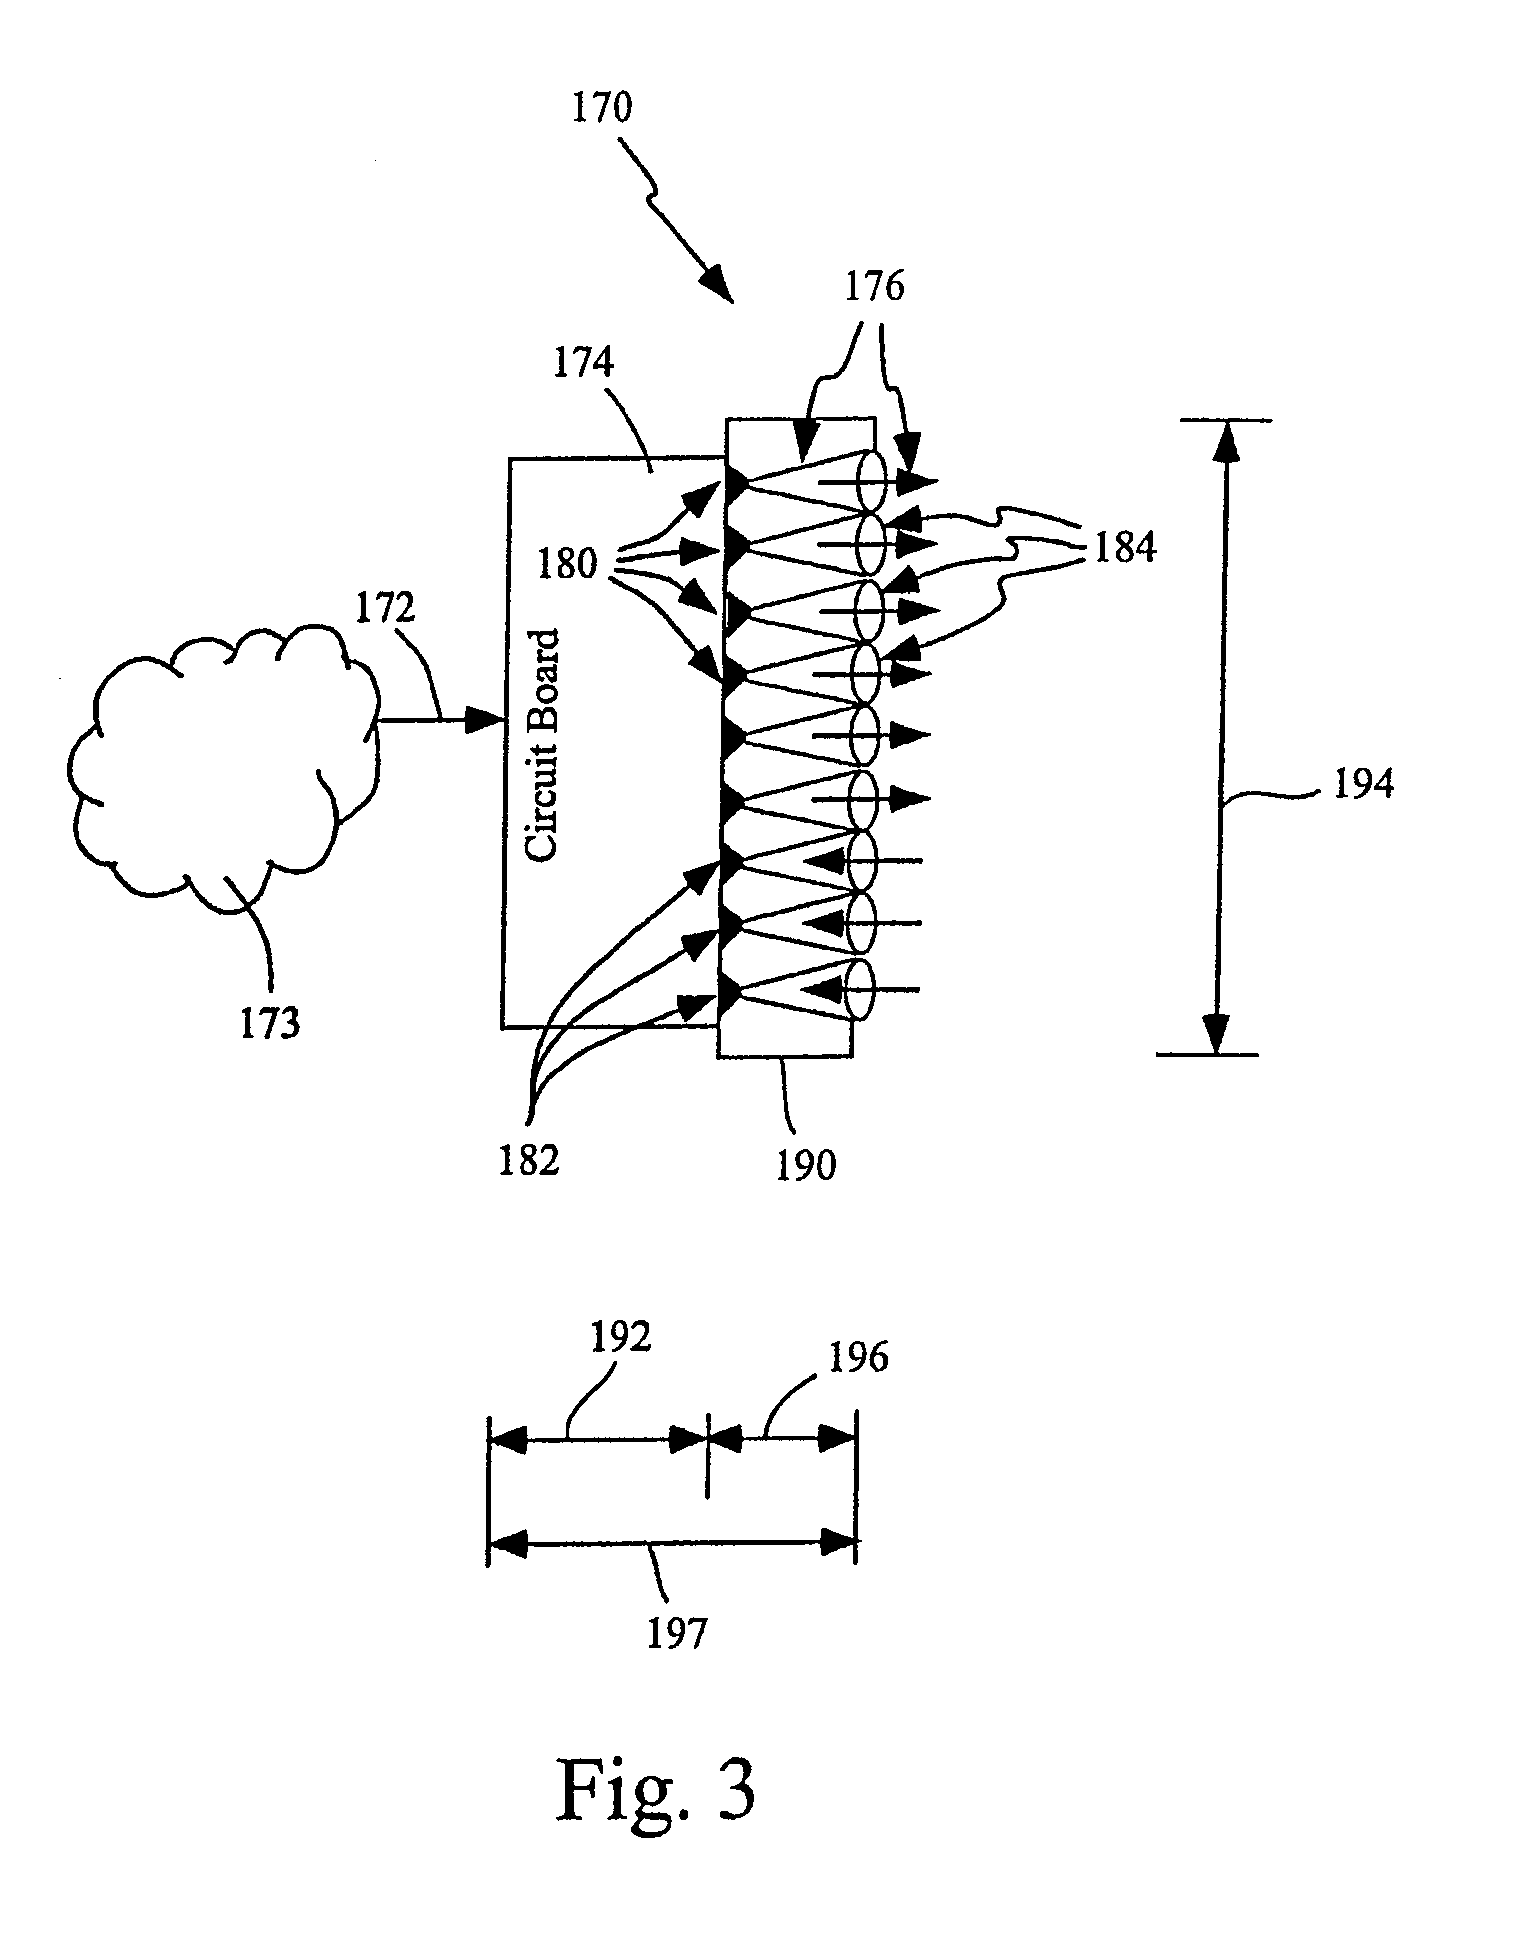 Apparatus and method for use in free-space optical communication comprising optically aligned components integrated on circuit boards